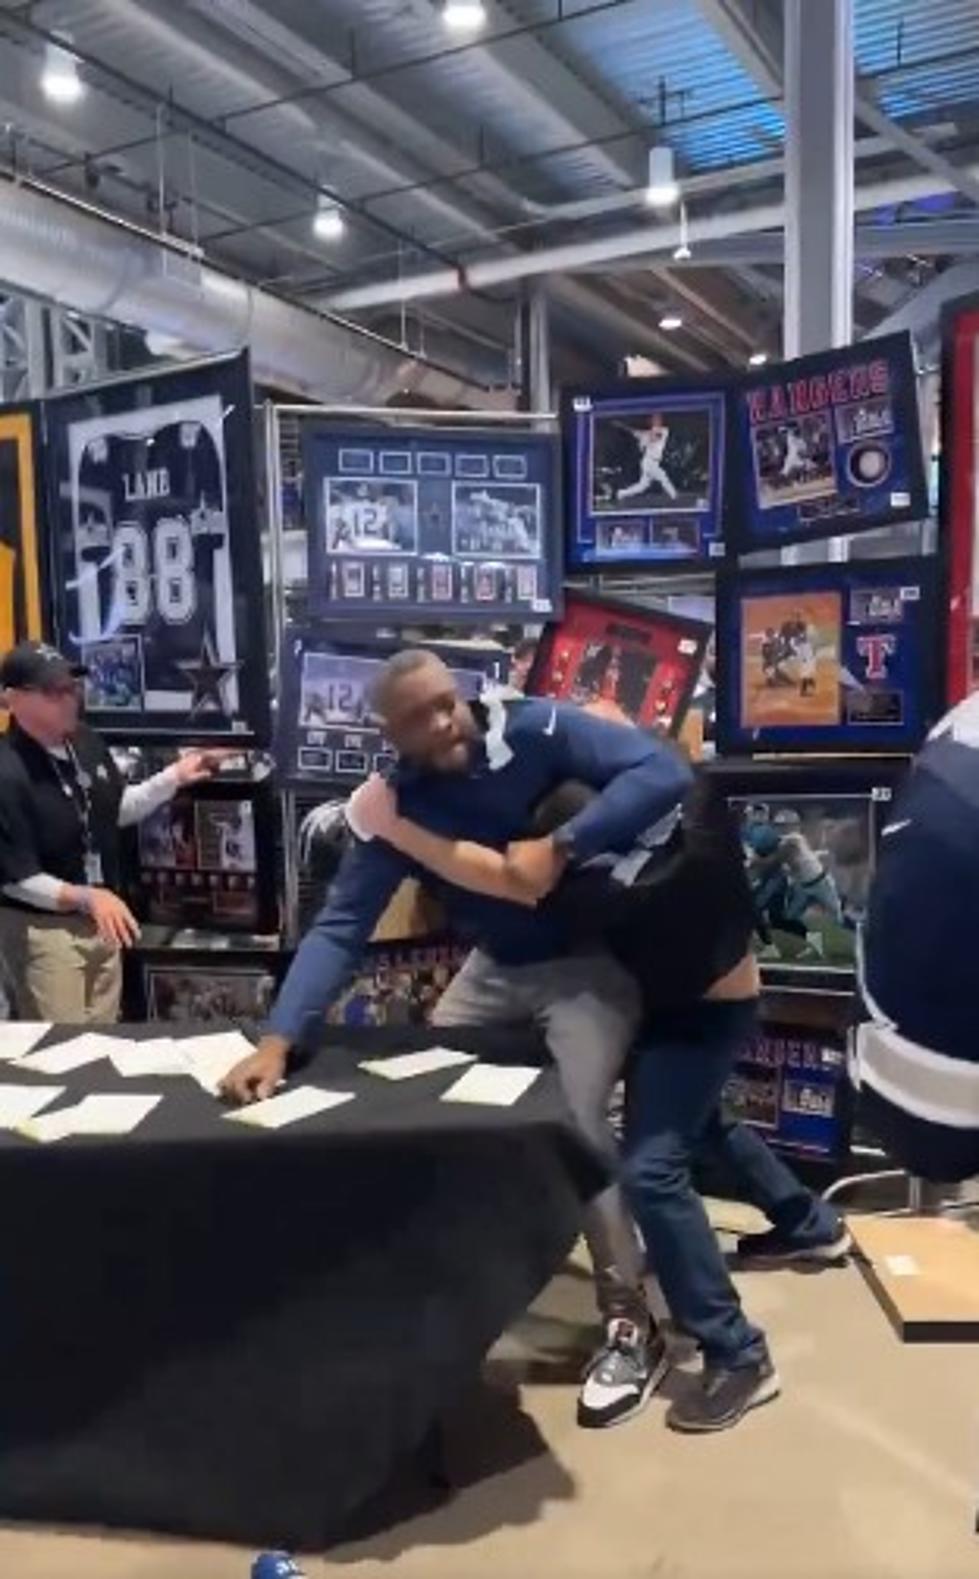 Dallas Cowboys Fan Almost Breaks Thousands of Dollars in Collectibles During Fight with Eagles Fan